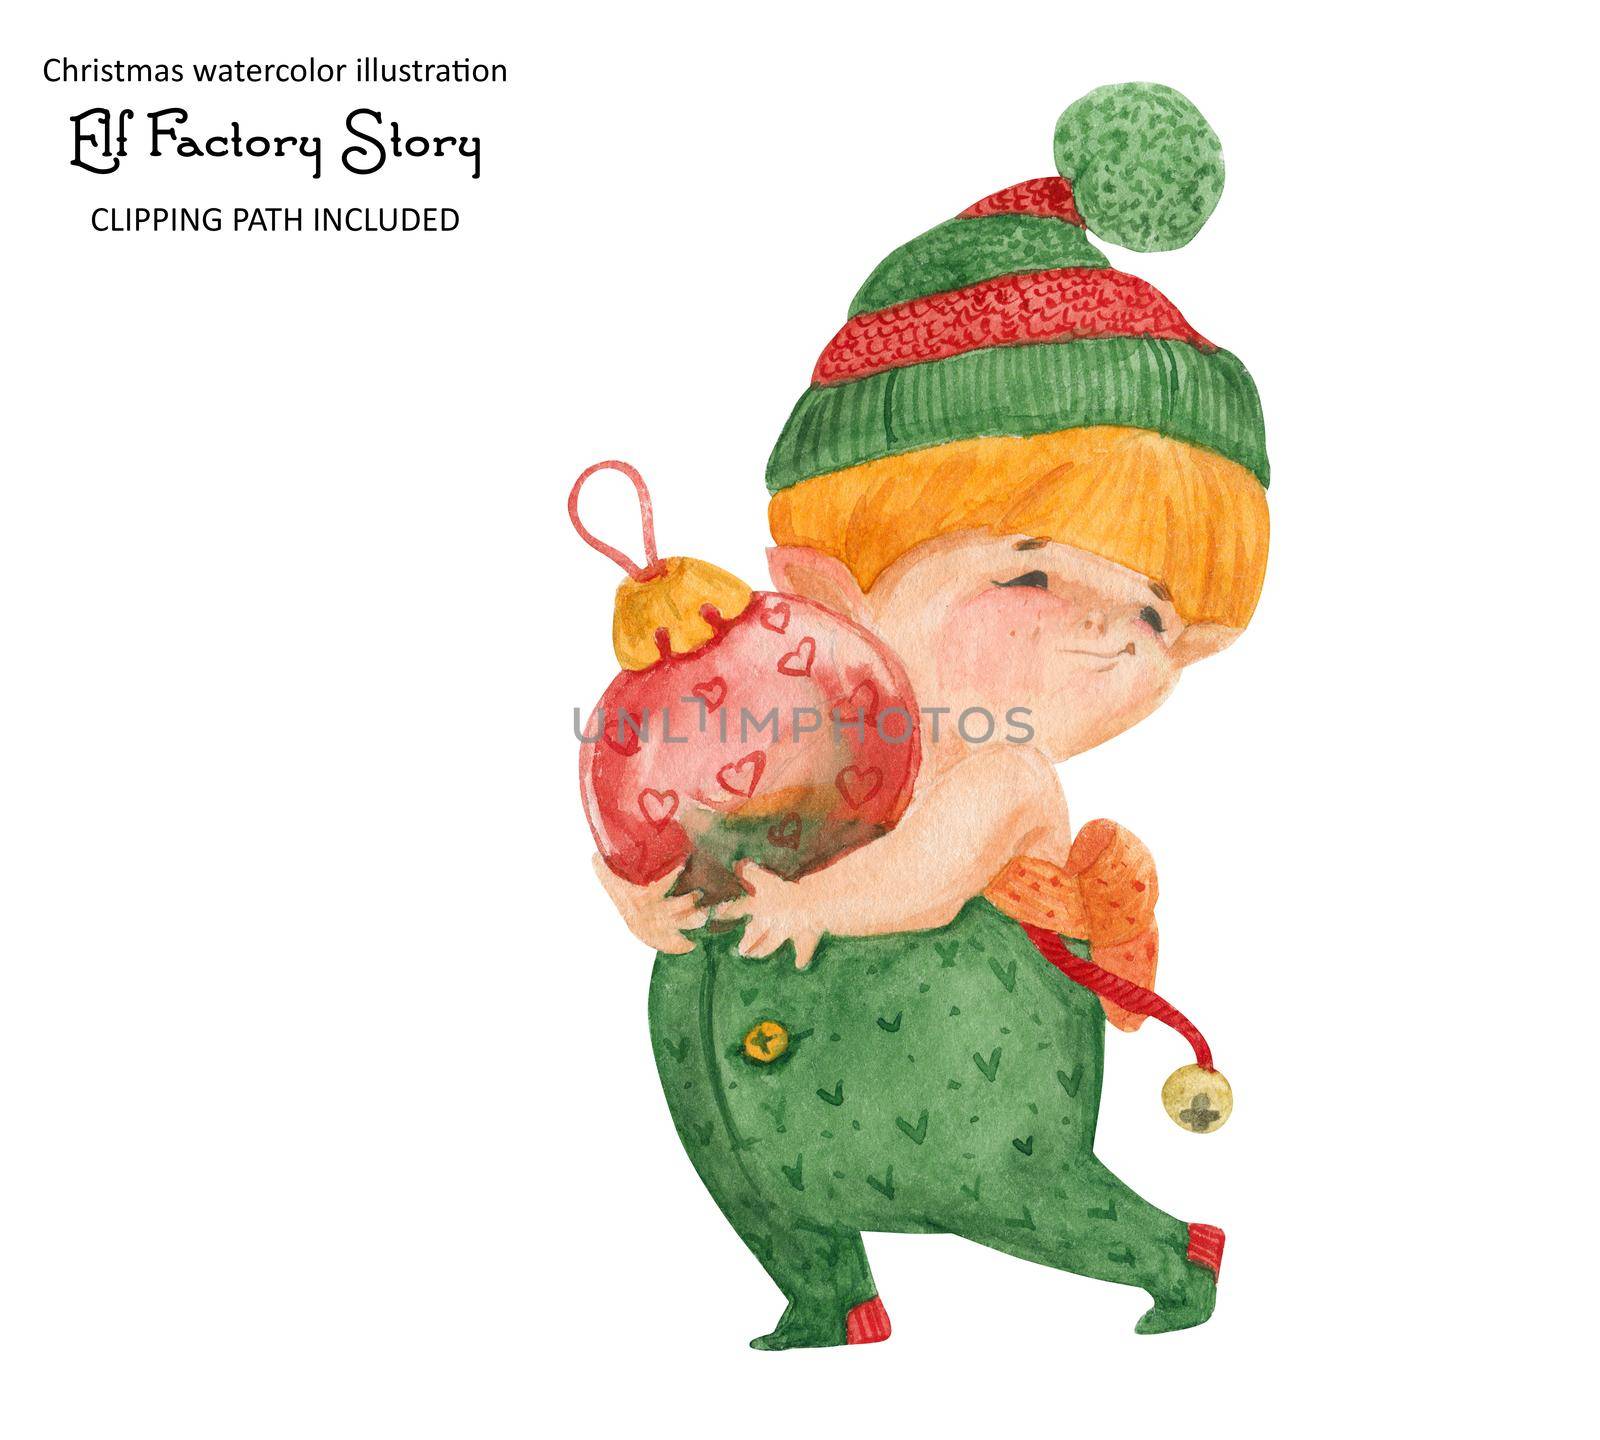 Christmas elf story, elf carries a Christmas ball, isolated watercolor and clipping path